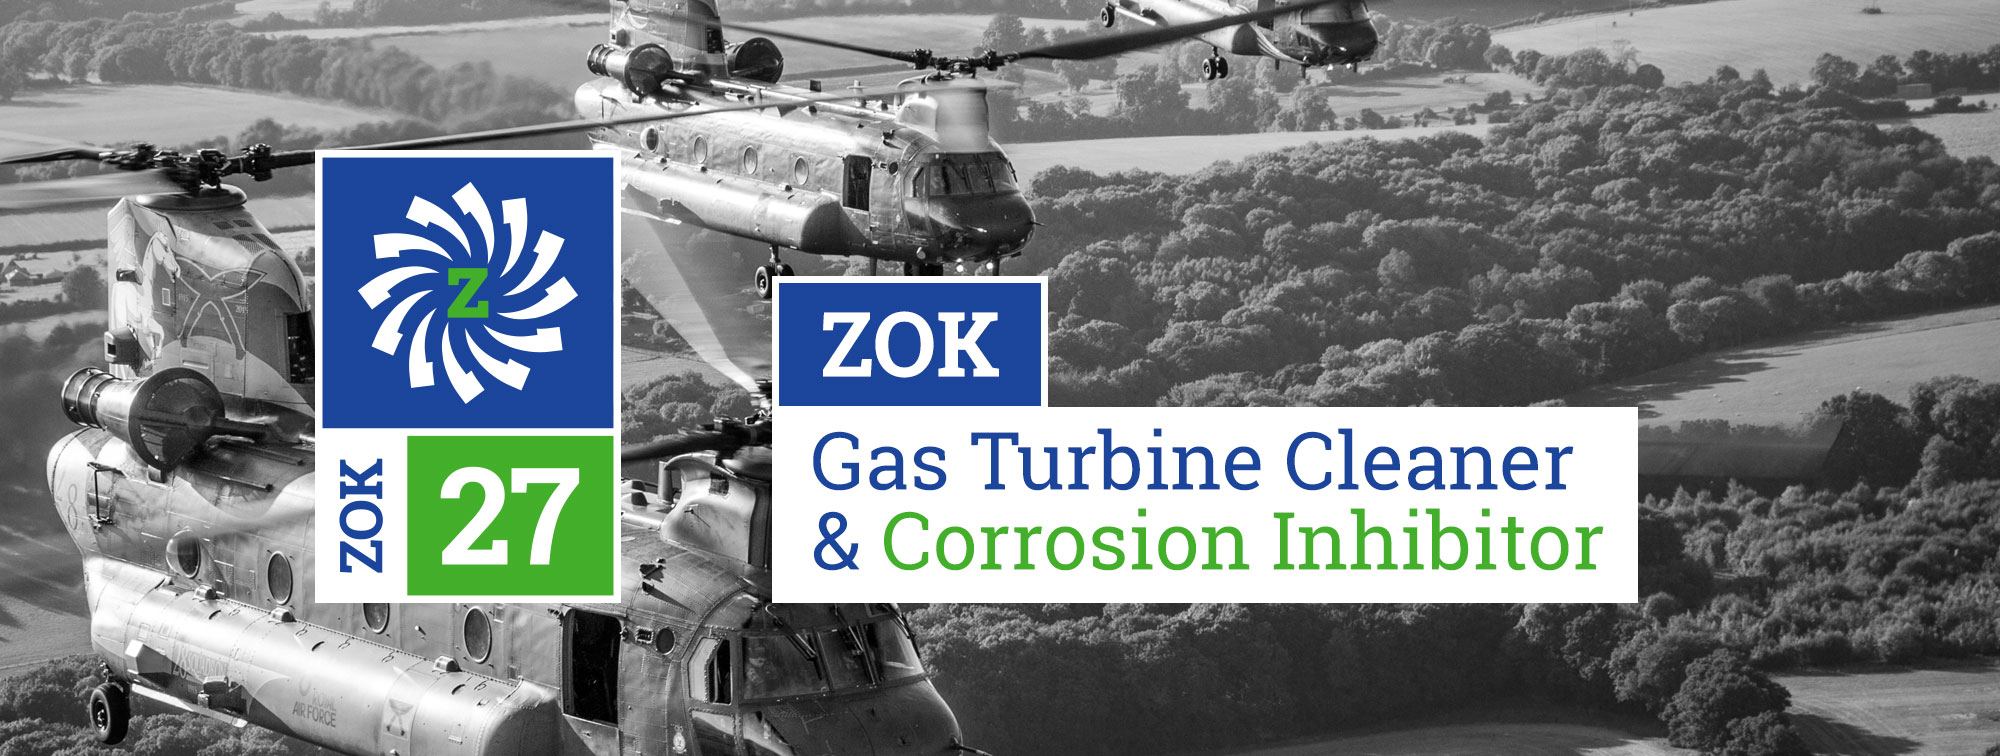 Zok 27 Gas Turbine Cleaner and Corrosion Inhibitor